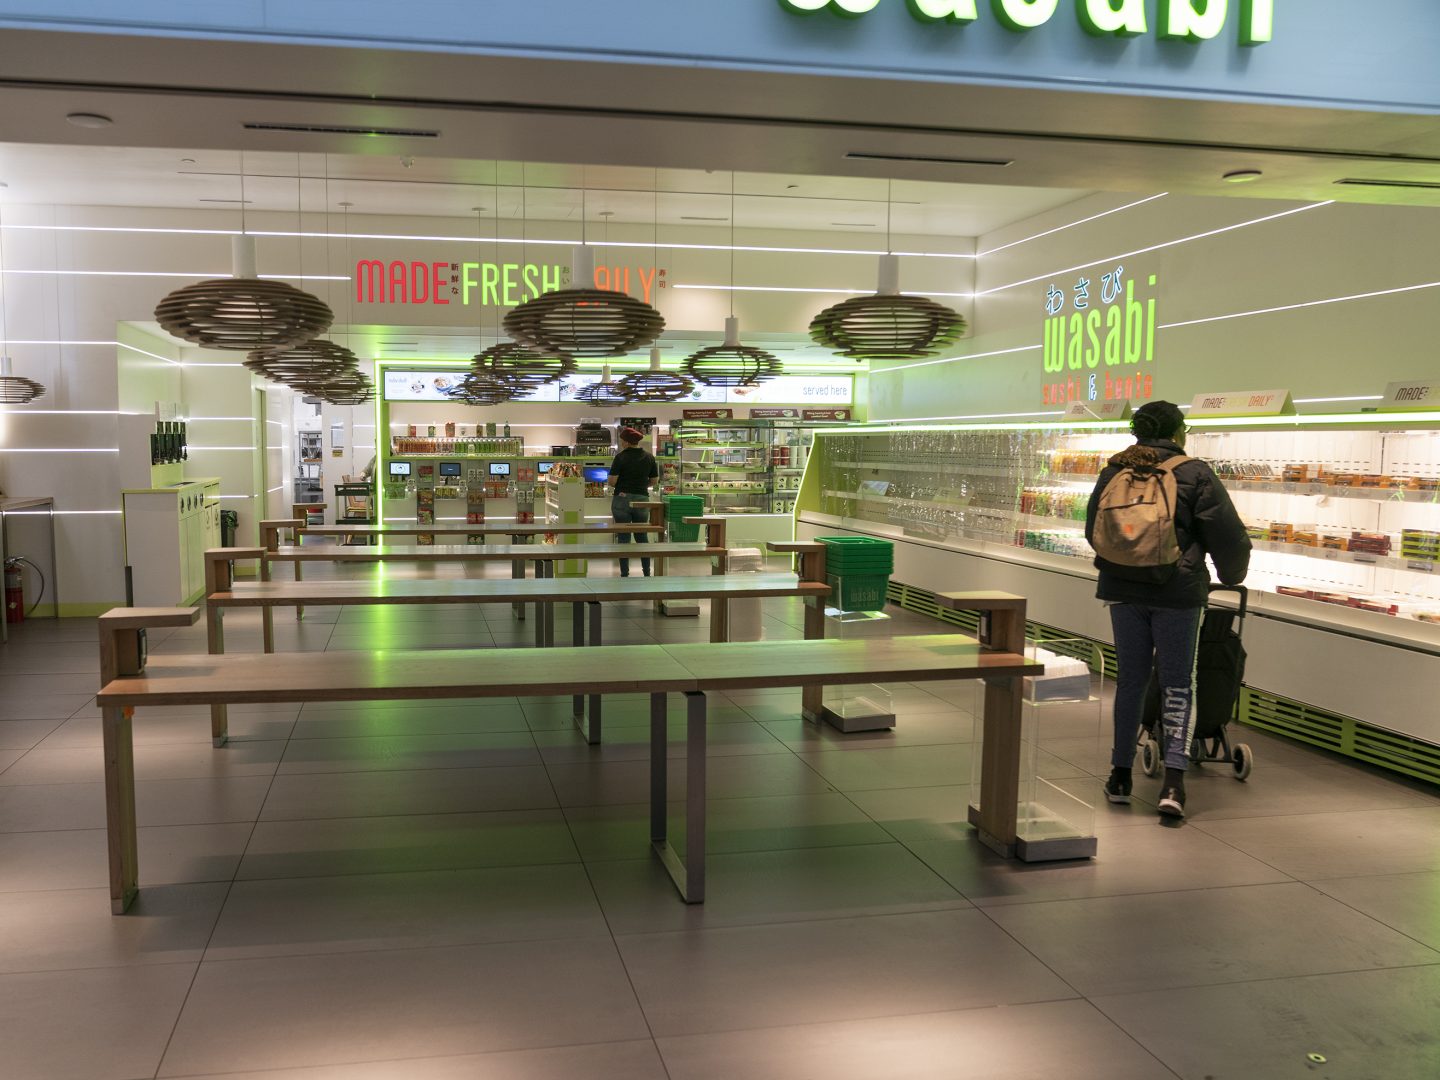 Food businesses are being urged to serve only take-out orders to reduce the spread of the novel coronavirus. Photo taken at the Wasabi Store in Penn Station in New York, Monday, March 16th, 2020.